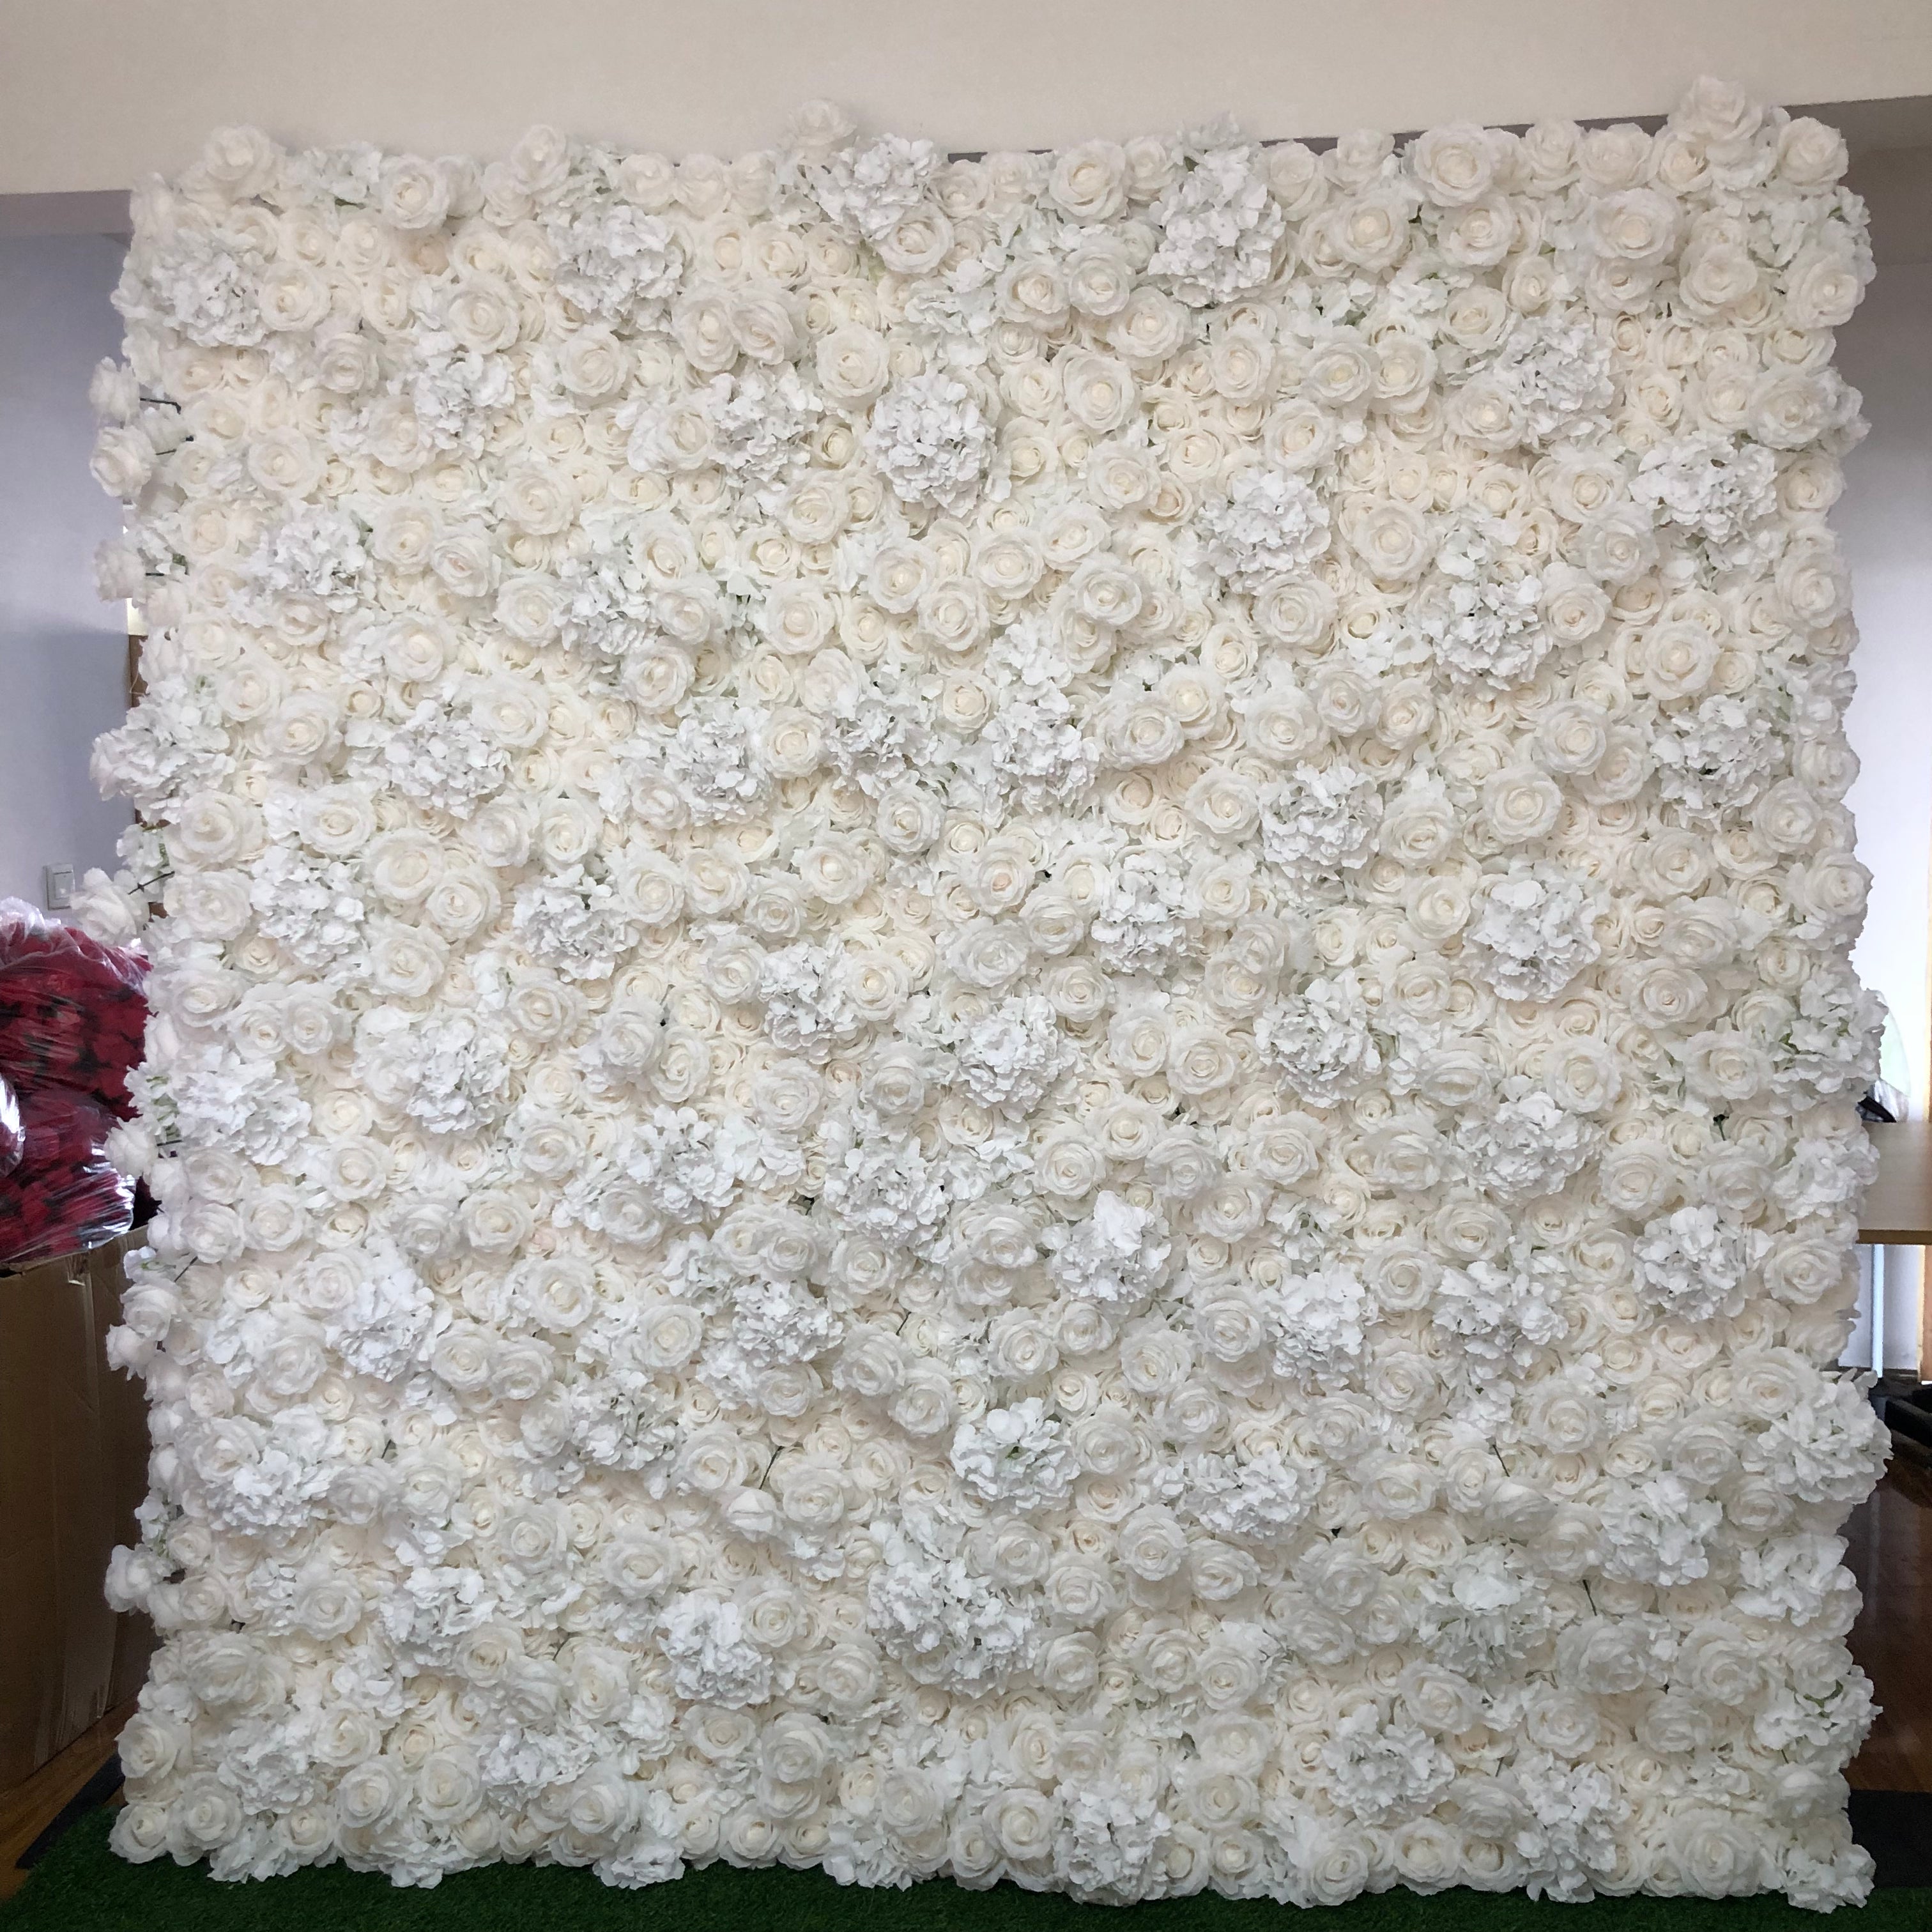 Flower Wall White Rose & Hydrangea Fabric Rolling Up Curtain Floral Backdrop Wedding Party Proposal Decor